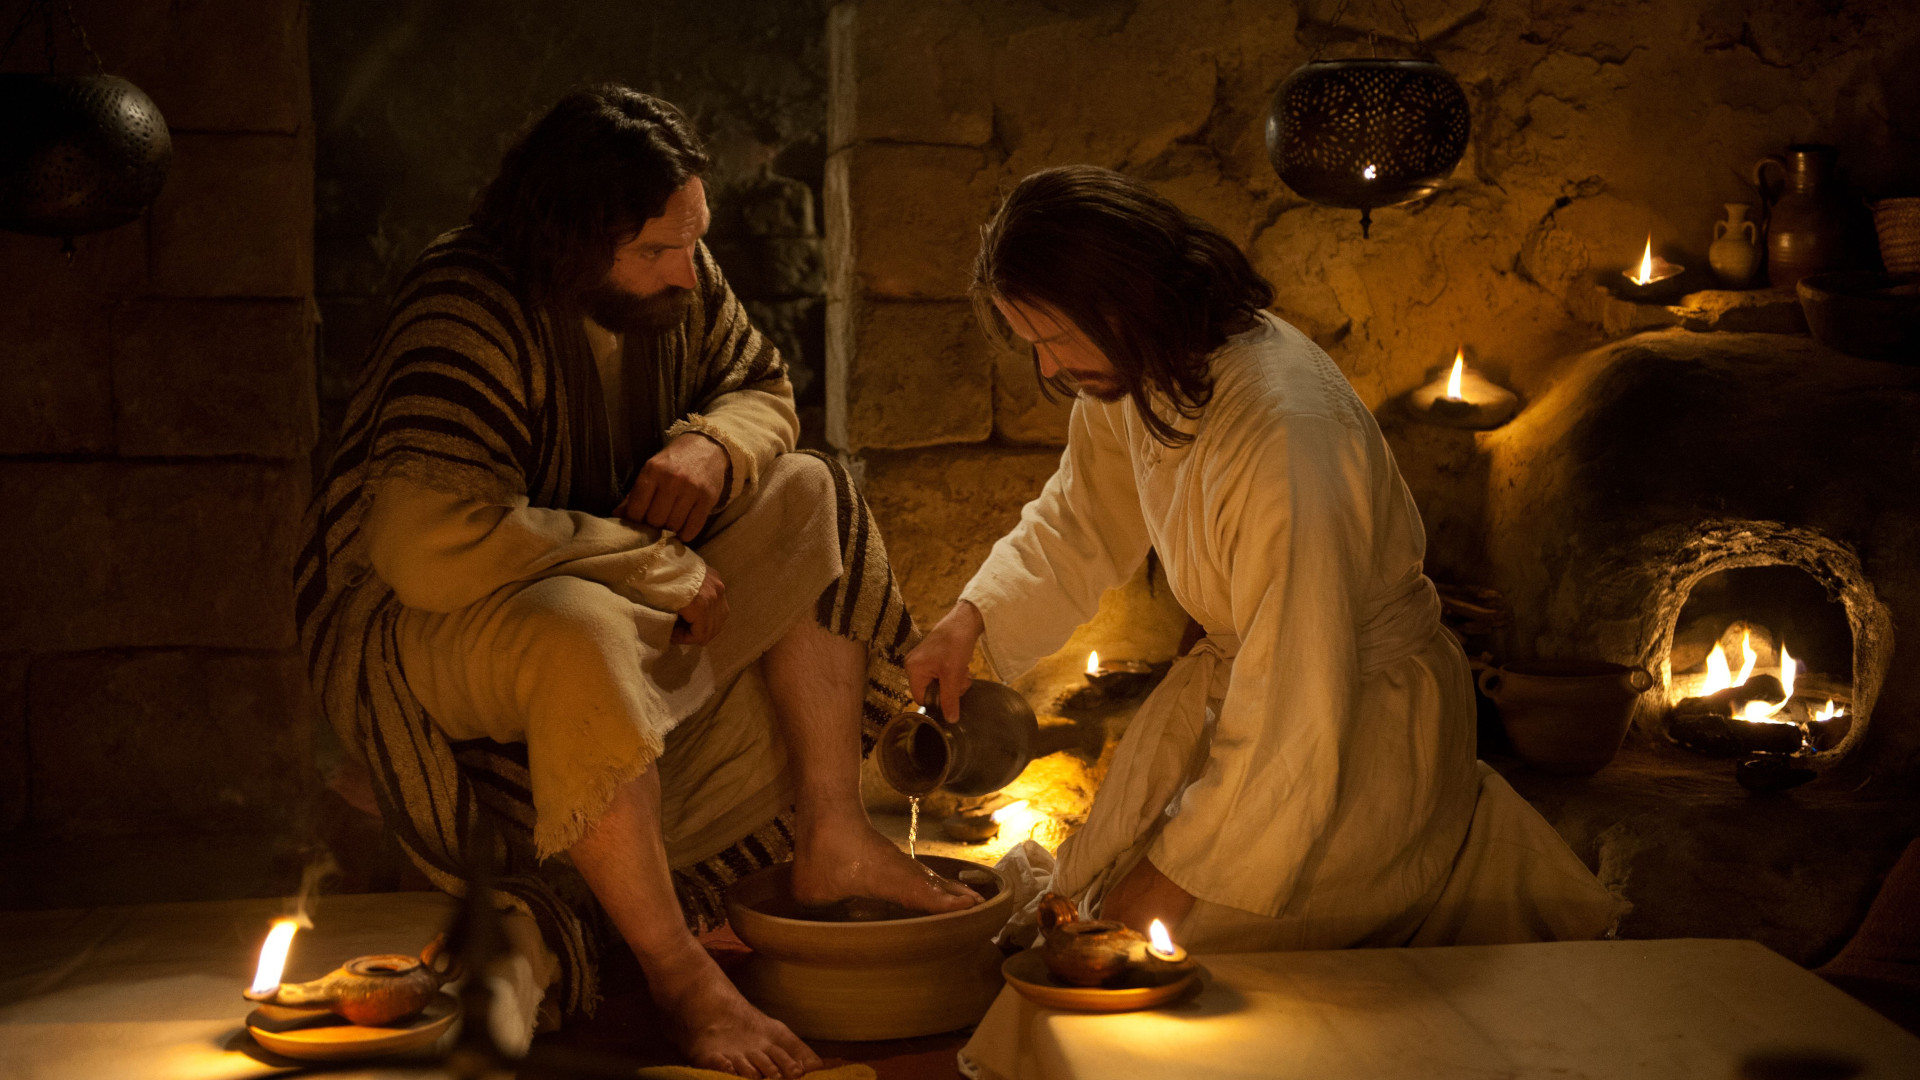 Christ washes the feet of Peter, his disciple.